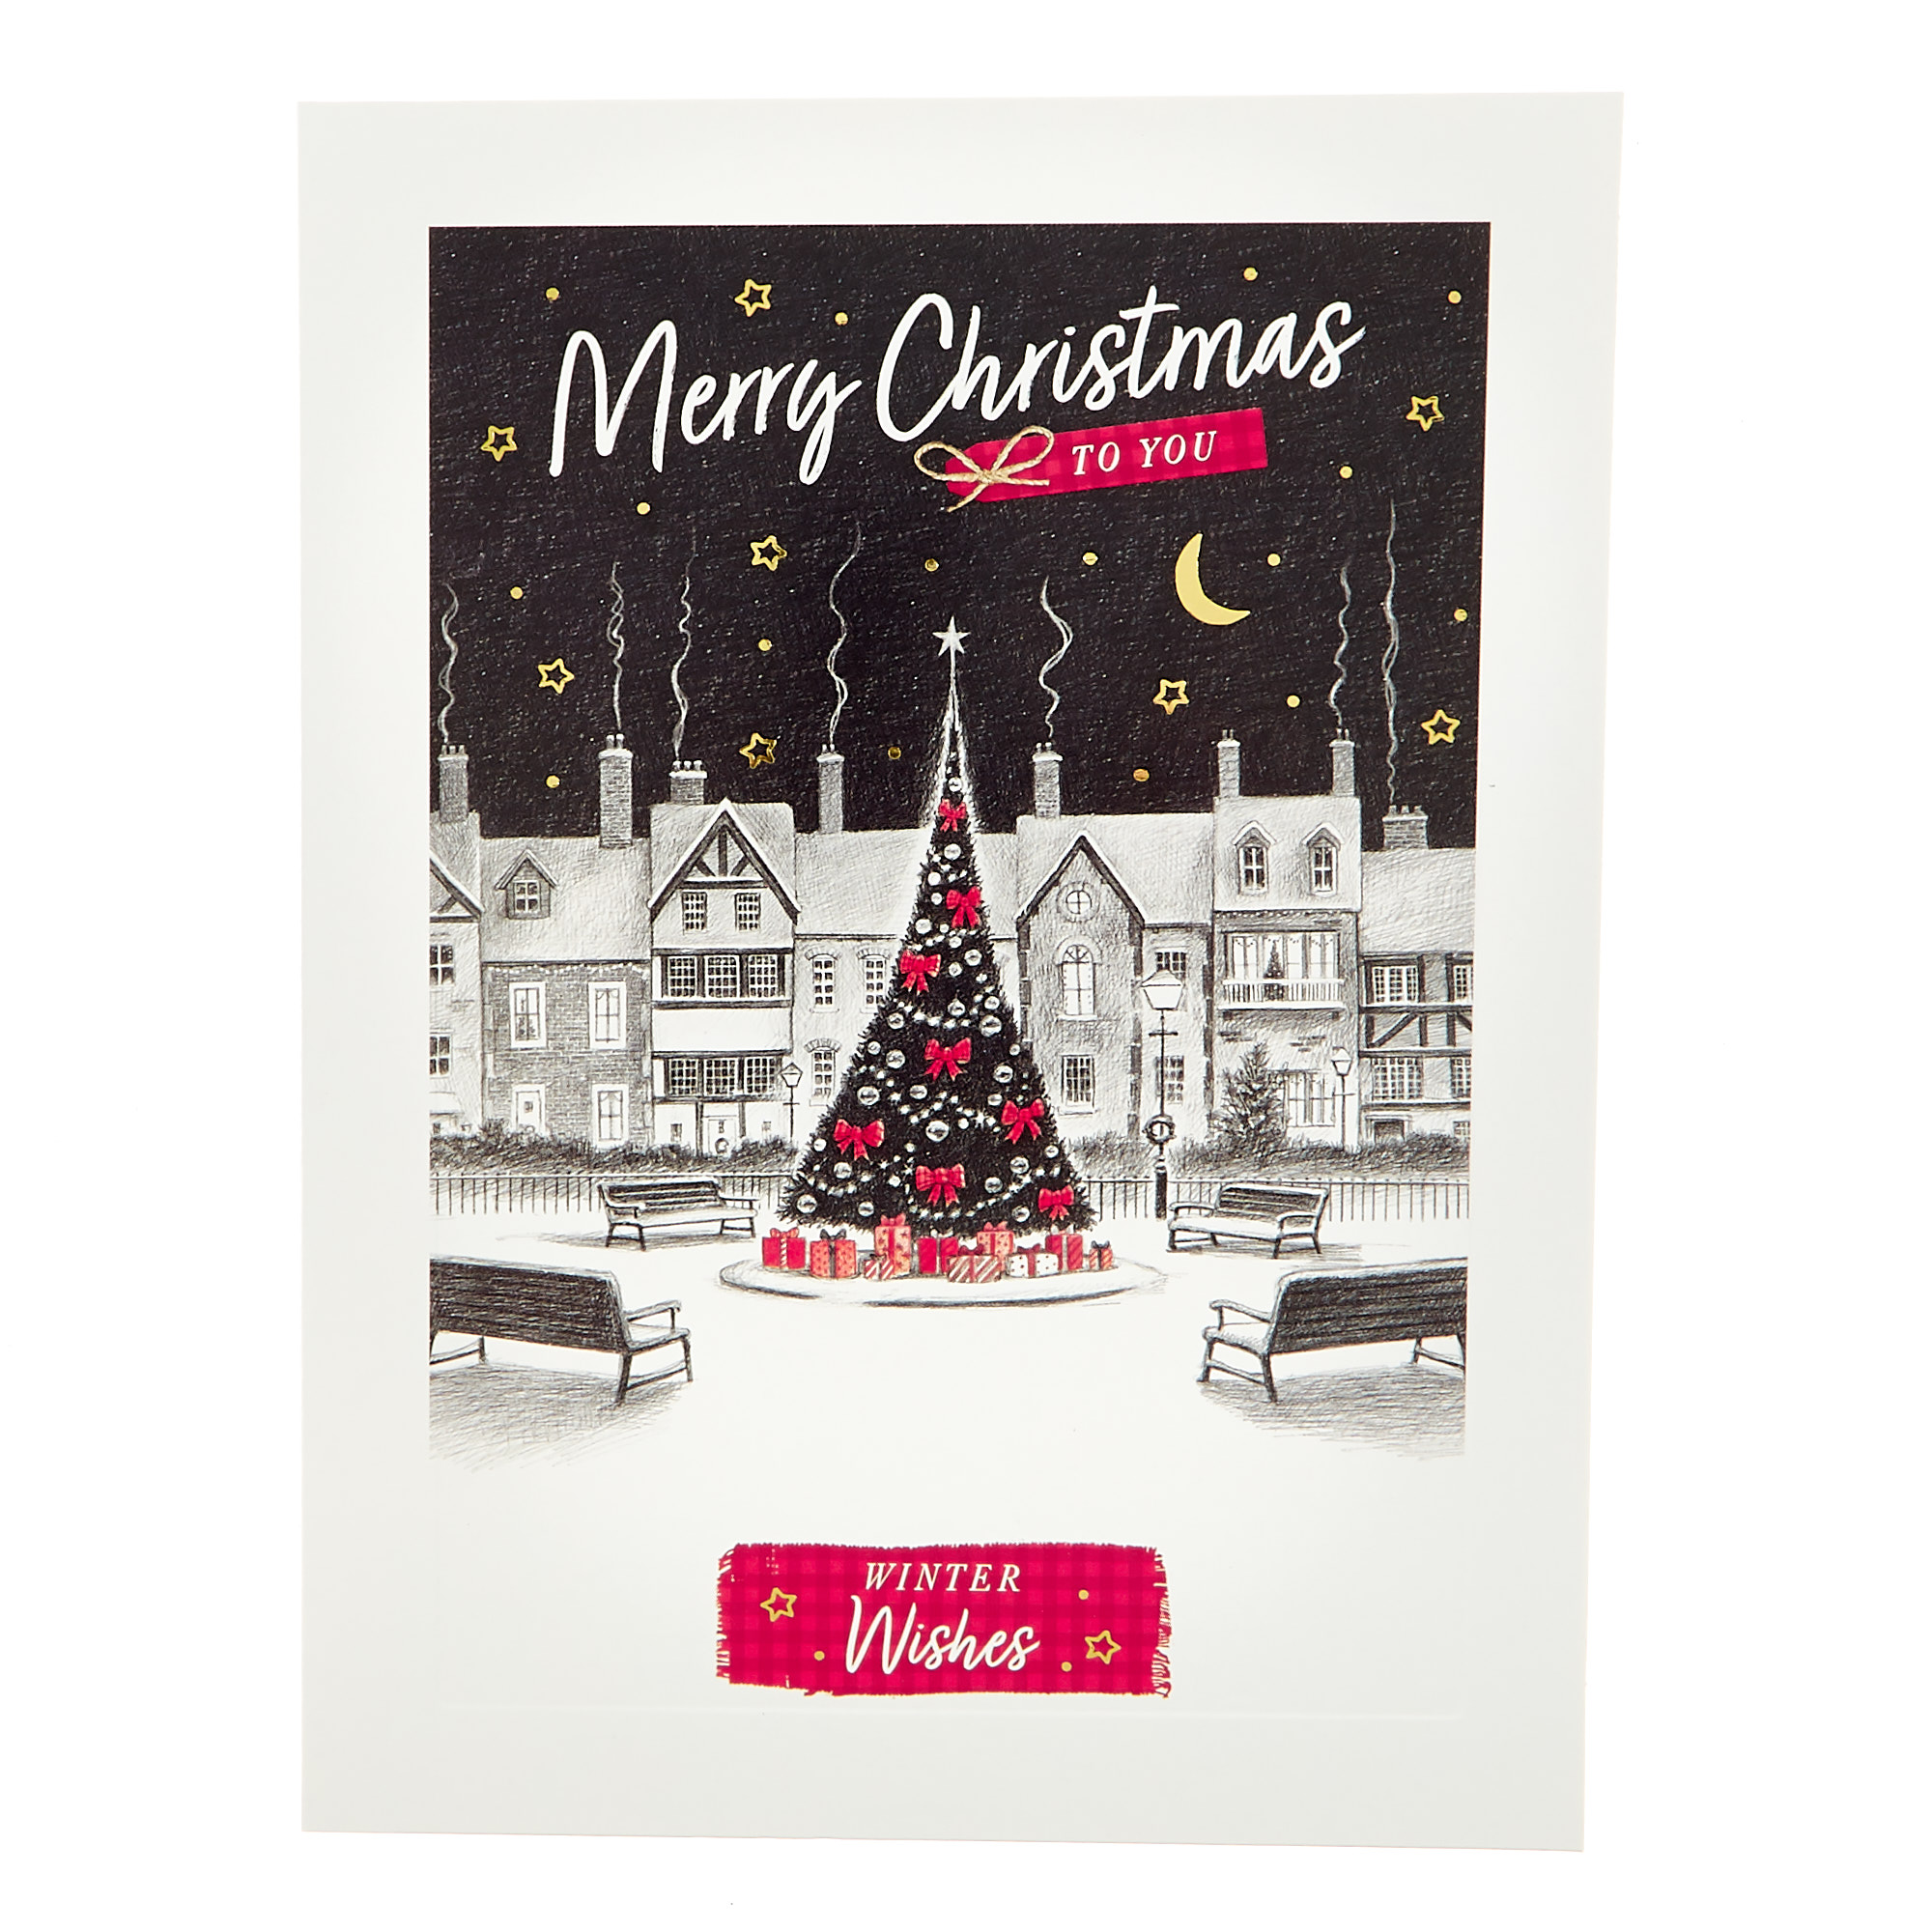 12 Deluxe Charity Boxed Christmas Cards - Snowy Villages (2 Designs)